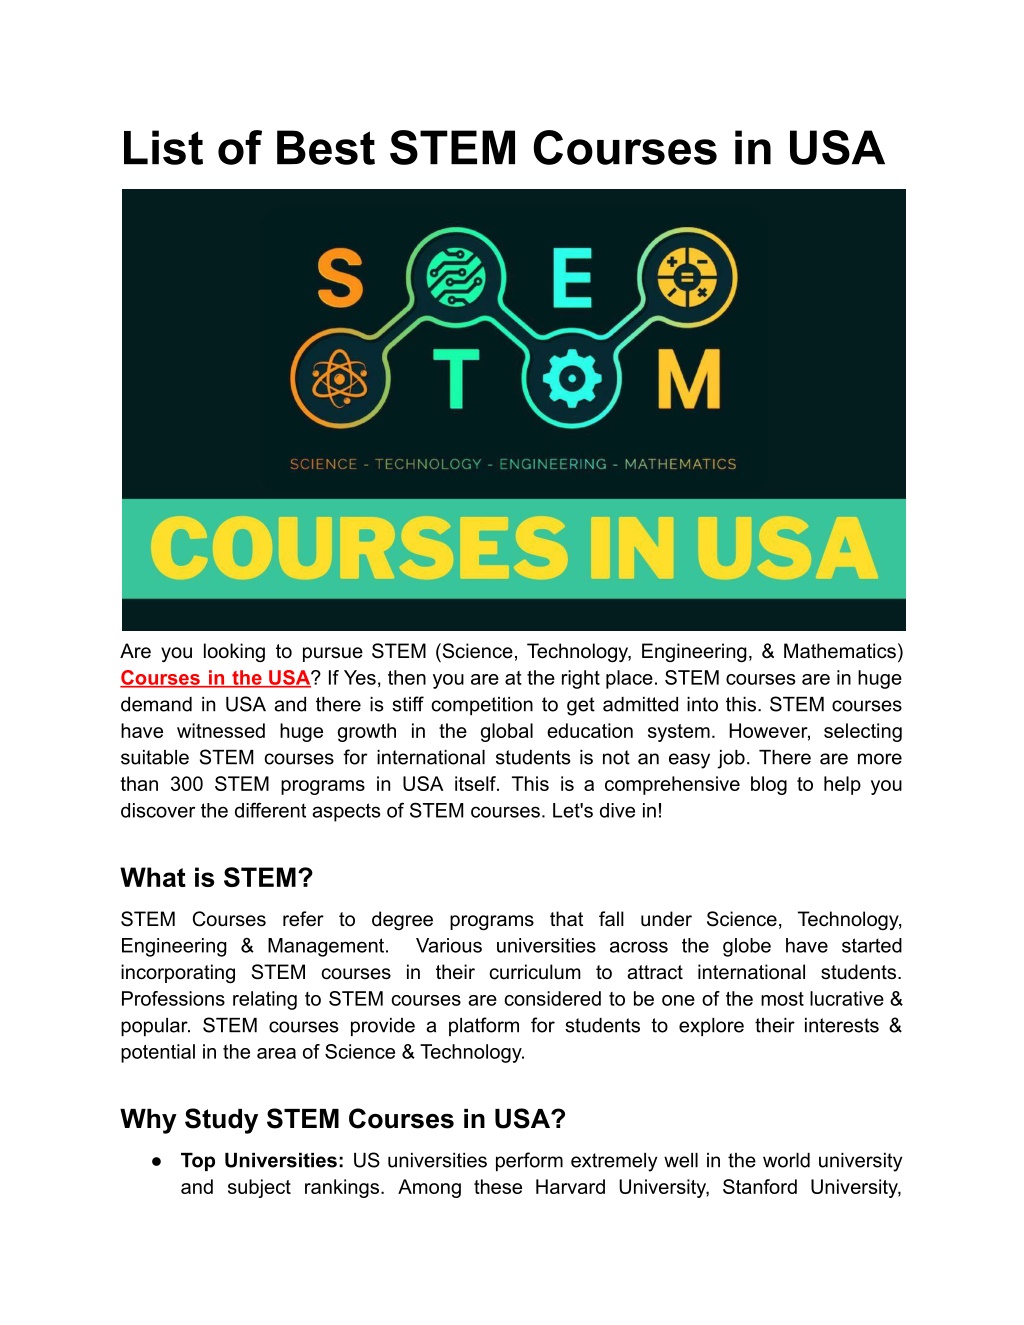 PPT List of STEM courses in USA PowerPoint Presentation, free